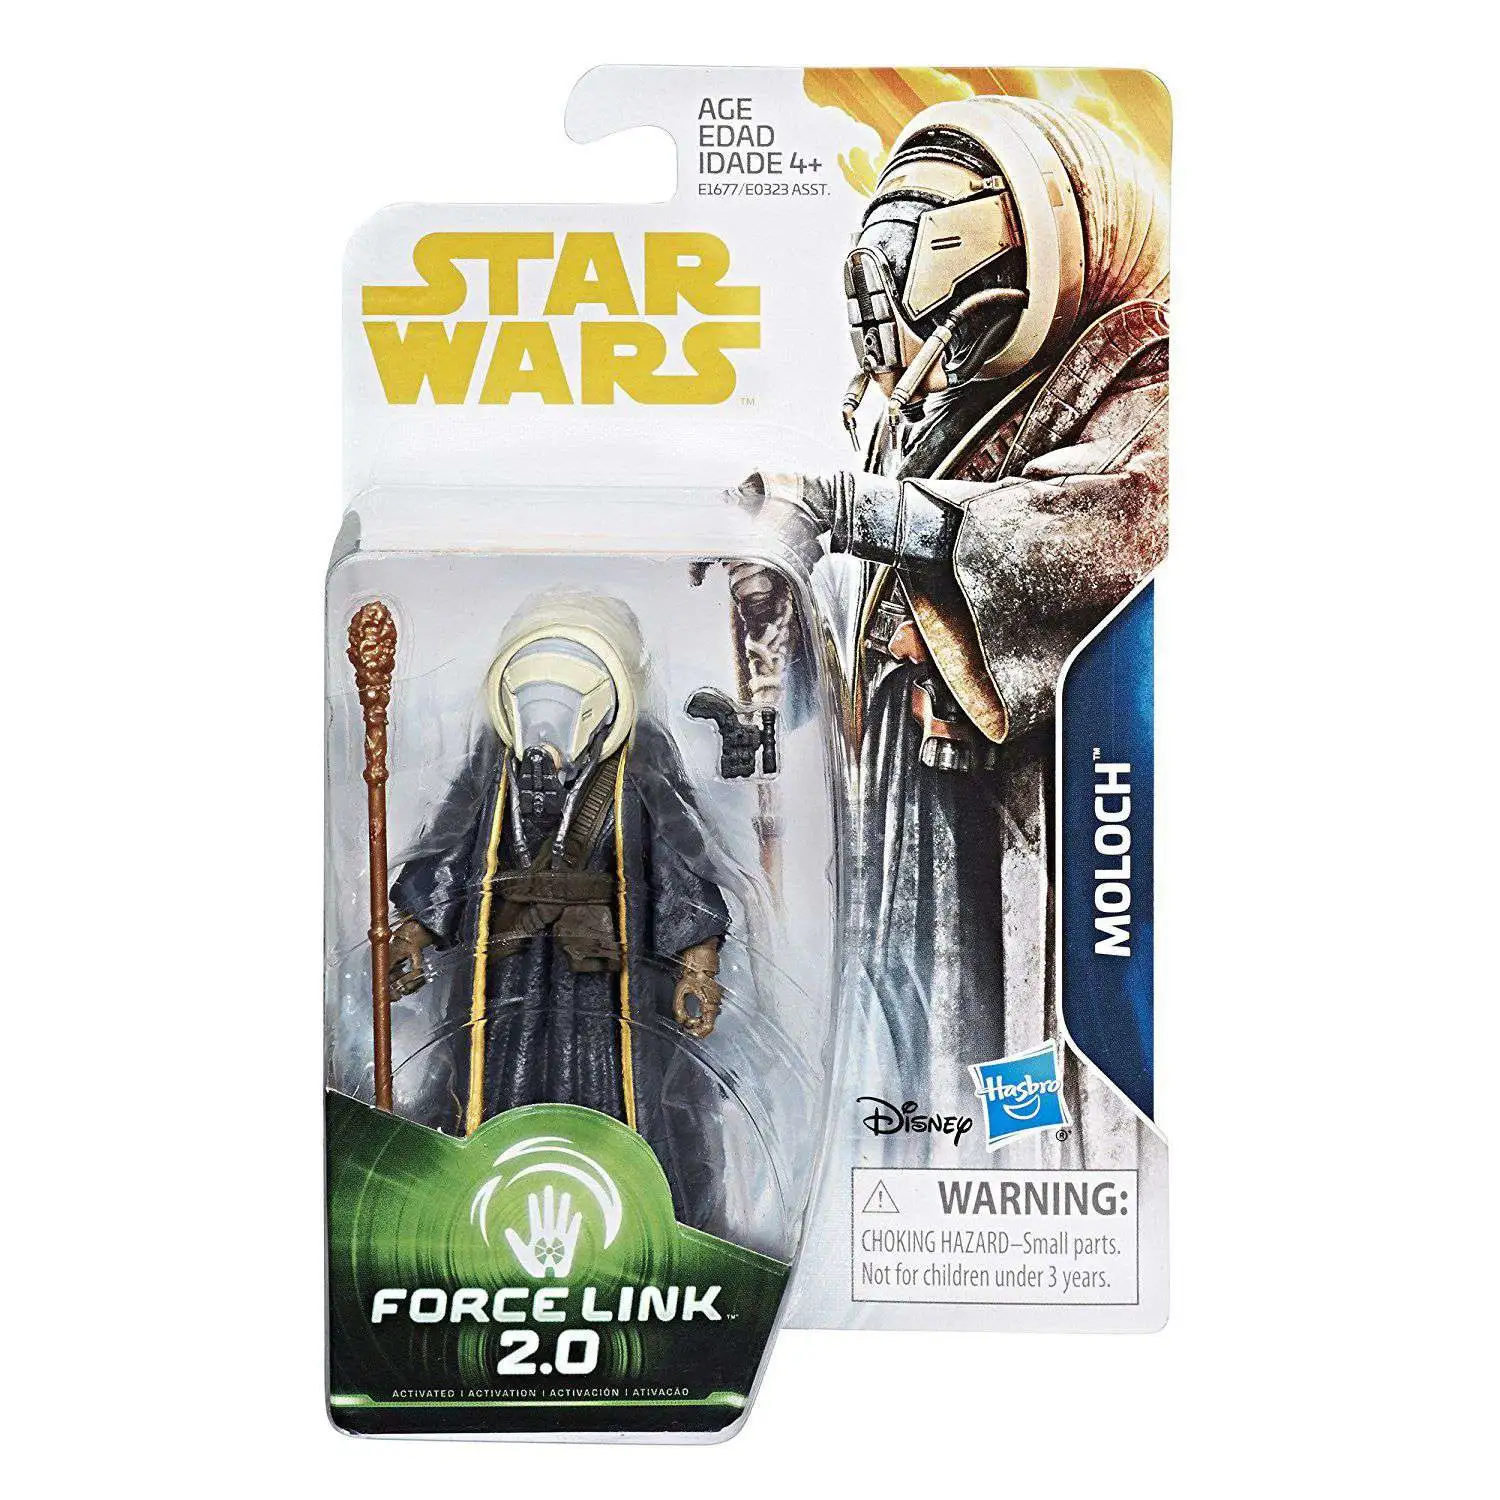 New and unopened MOC 3.75” solo film Moloch Star Wars figure Force Link 2.0 